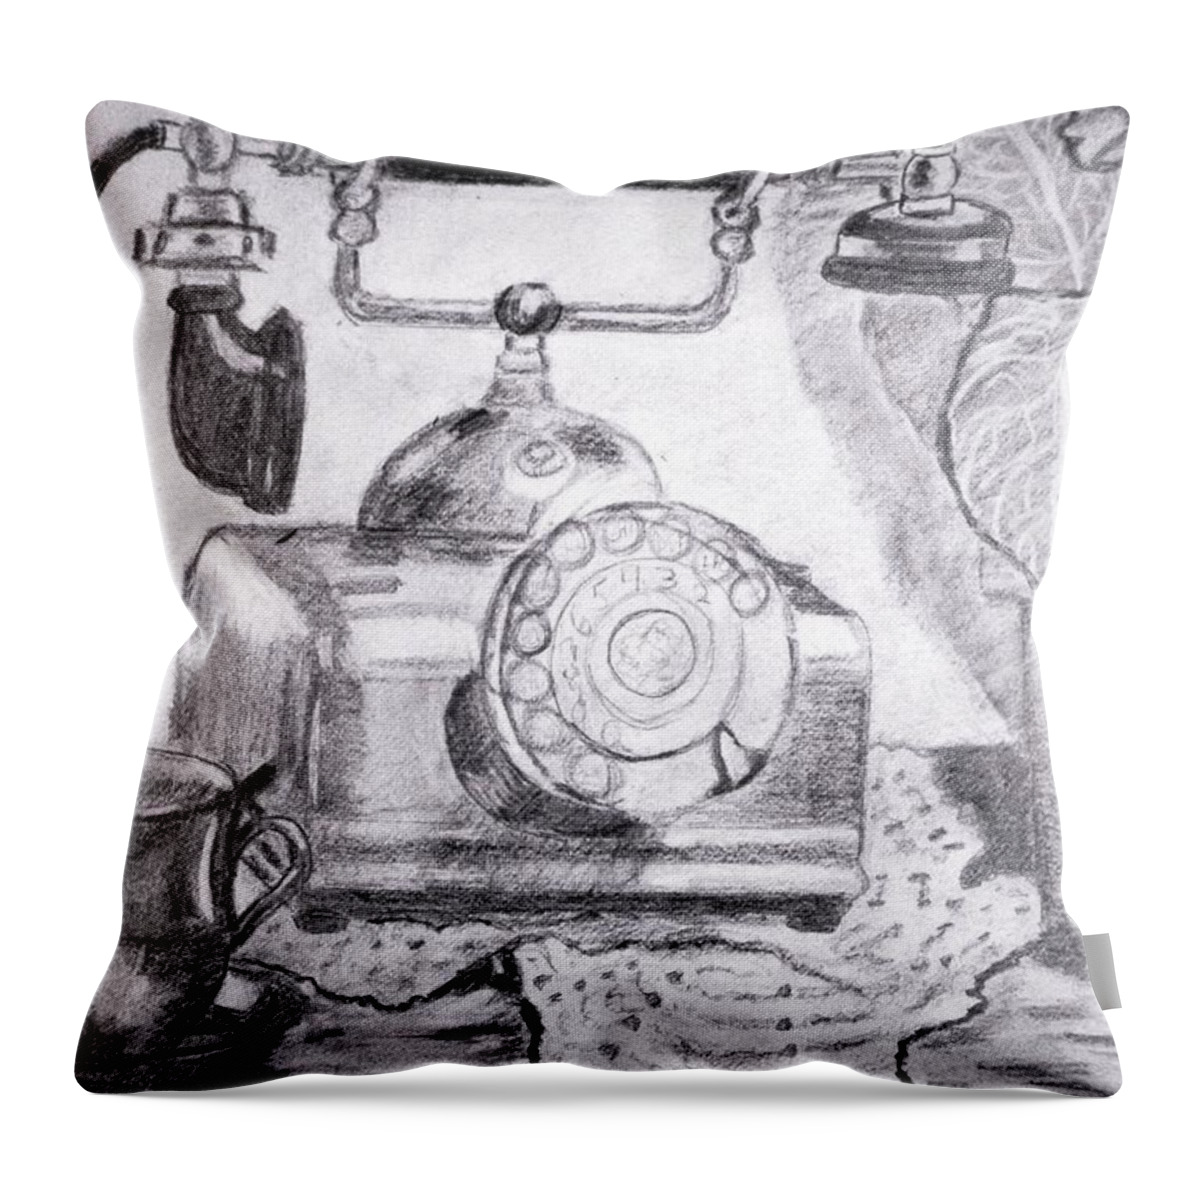 Antique Phone Throw Pillow featuring the drawing Tea Time by Vickie G Buccini